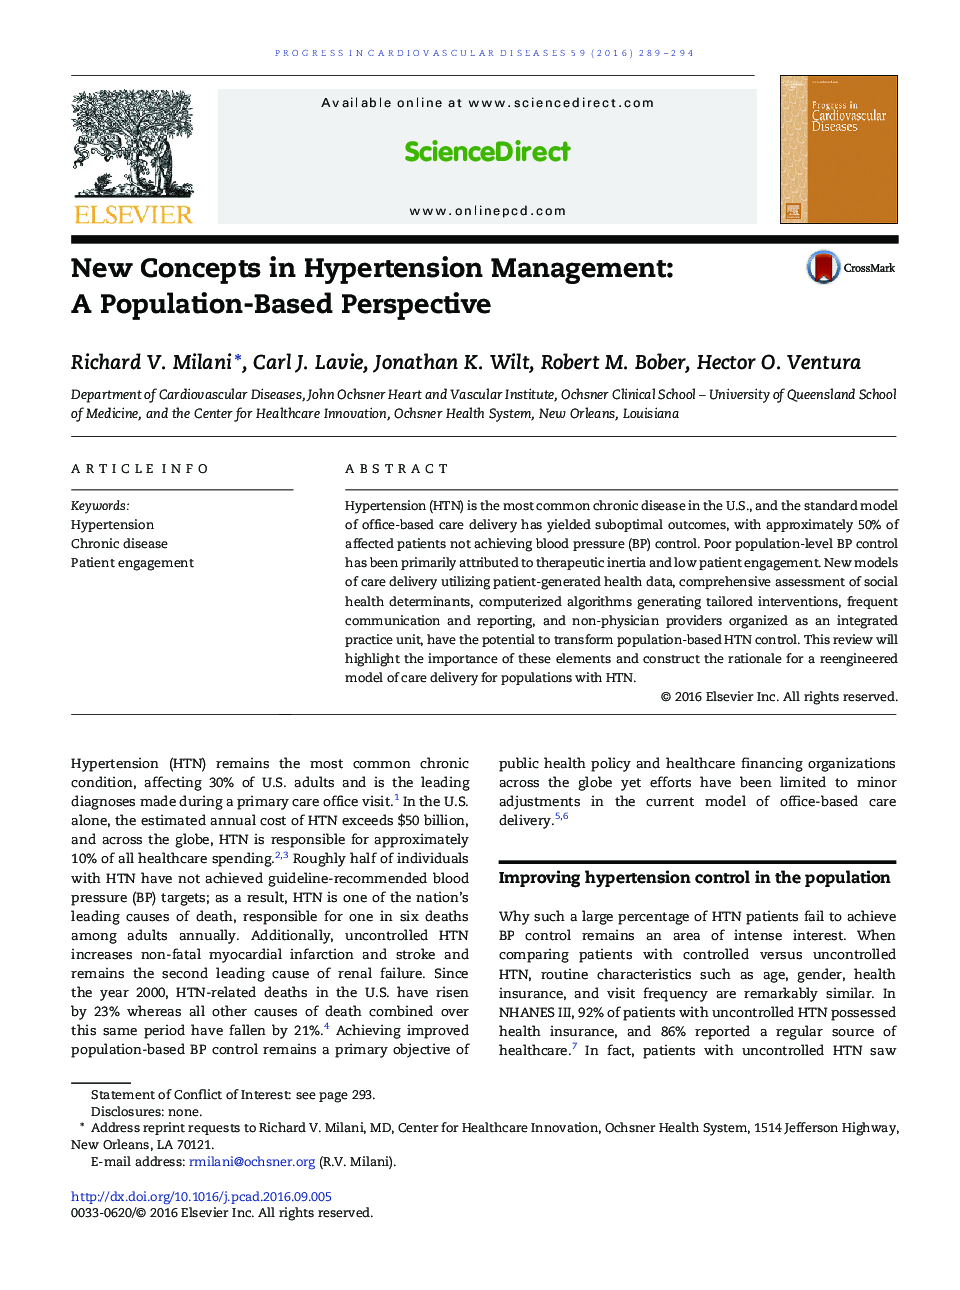 New Concepts in Hypertension Management: A Population-Based Perspective